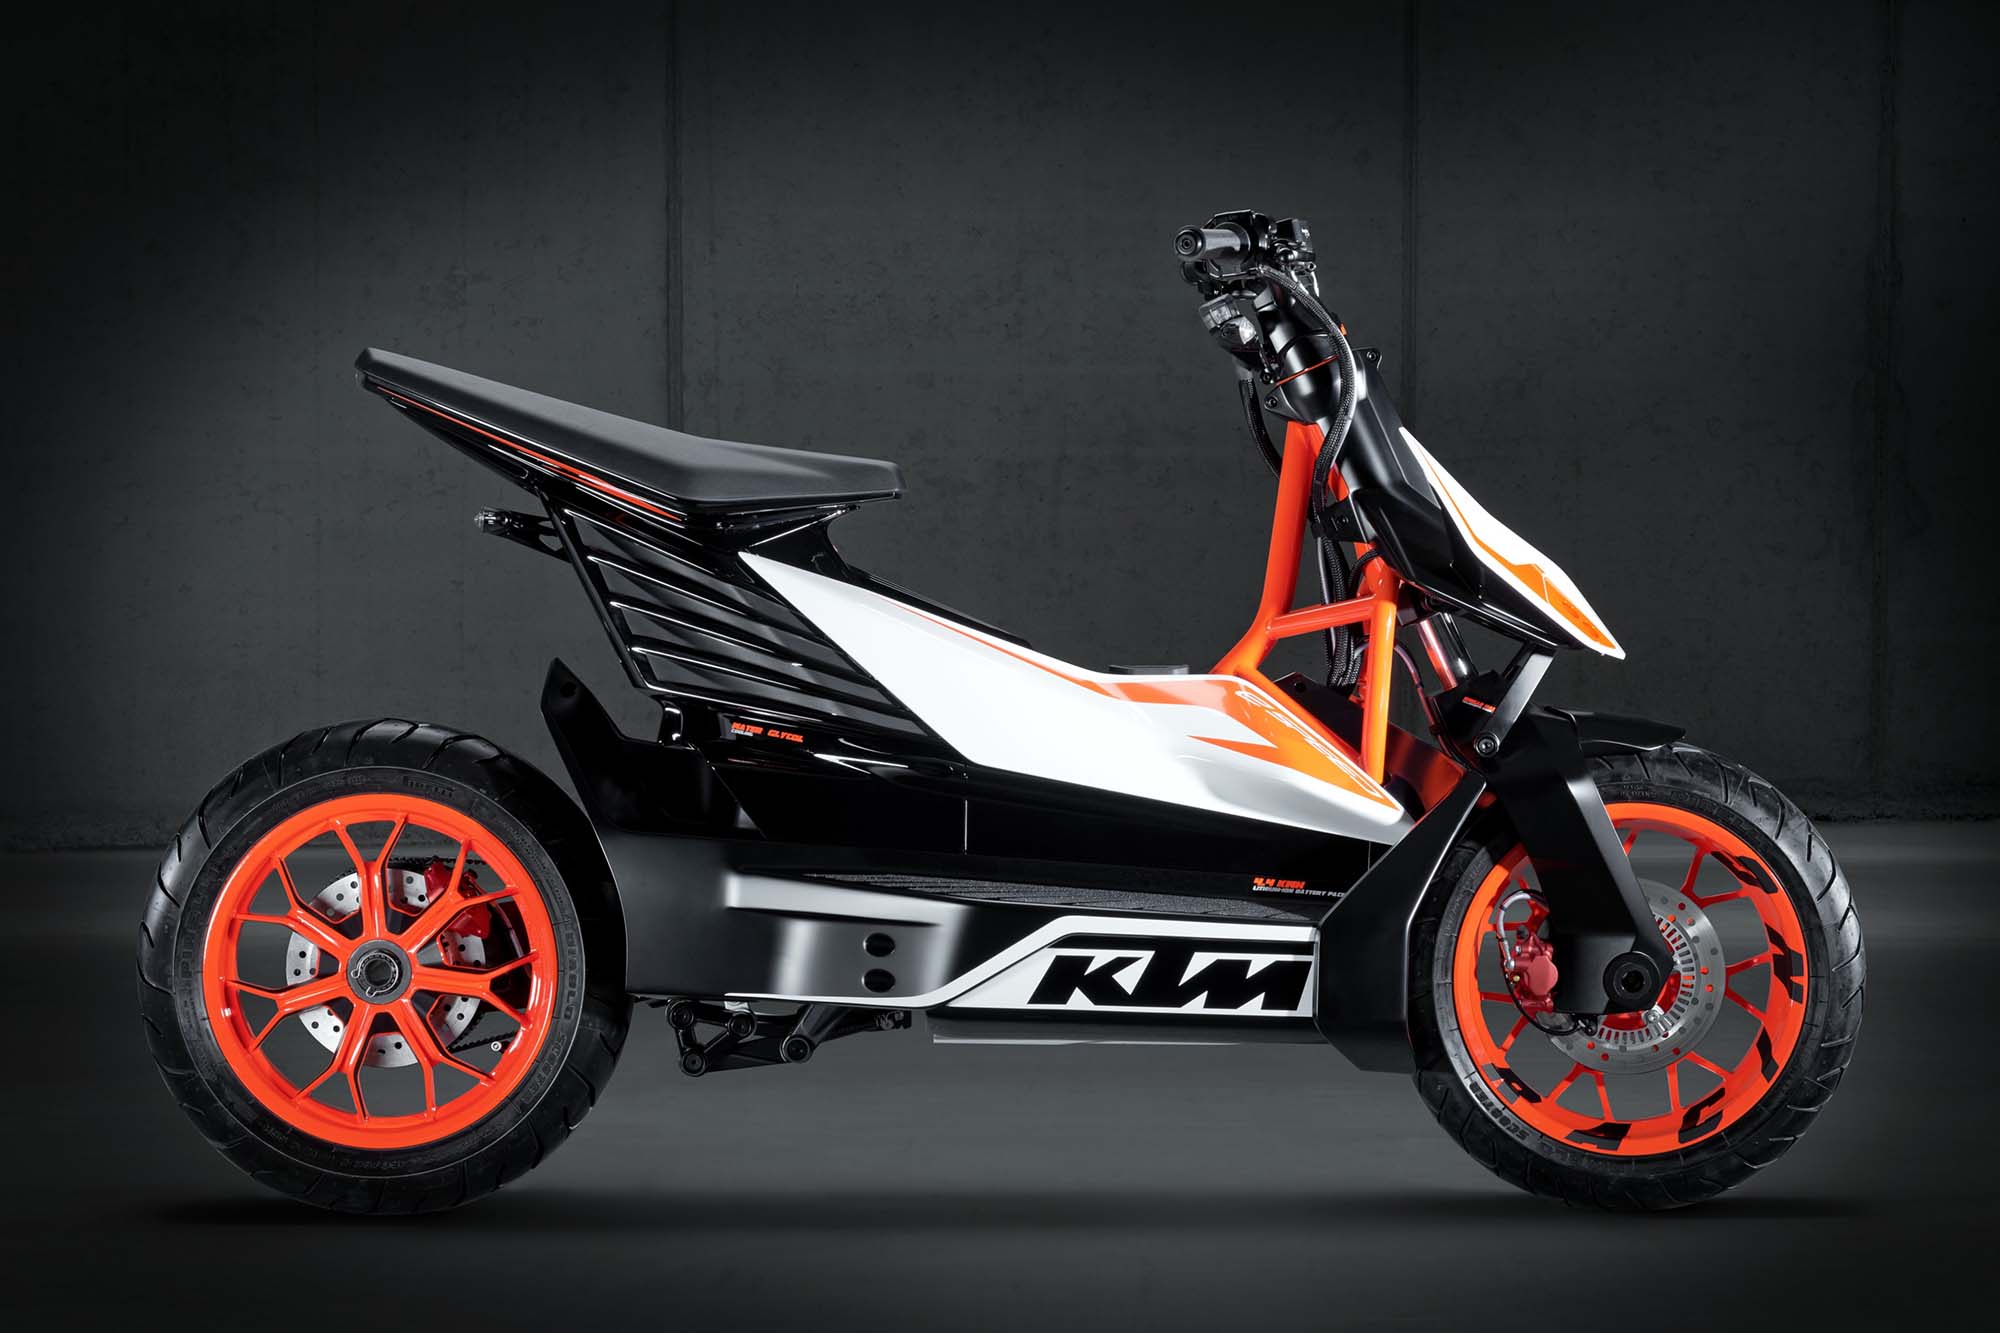  KTM  E Speed Available in 2015 KTM  Freeride E in 2014 